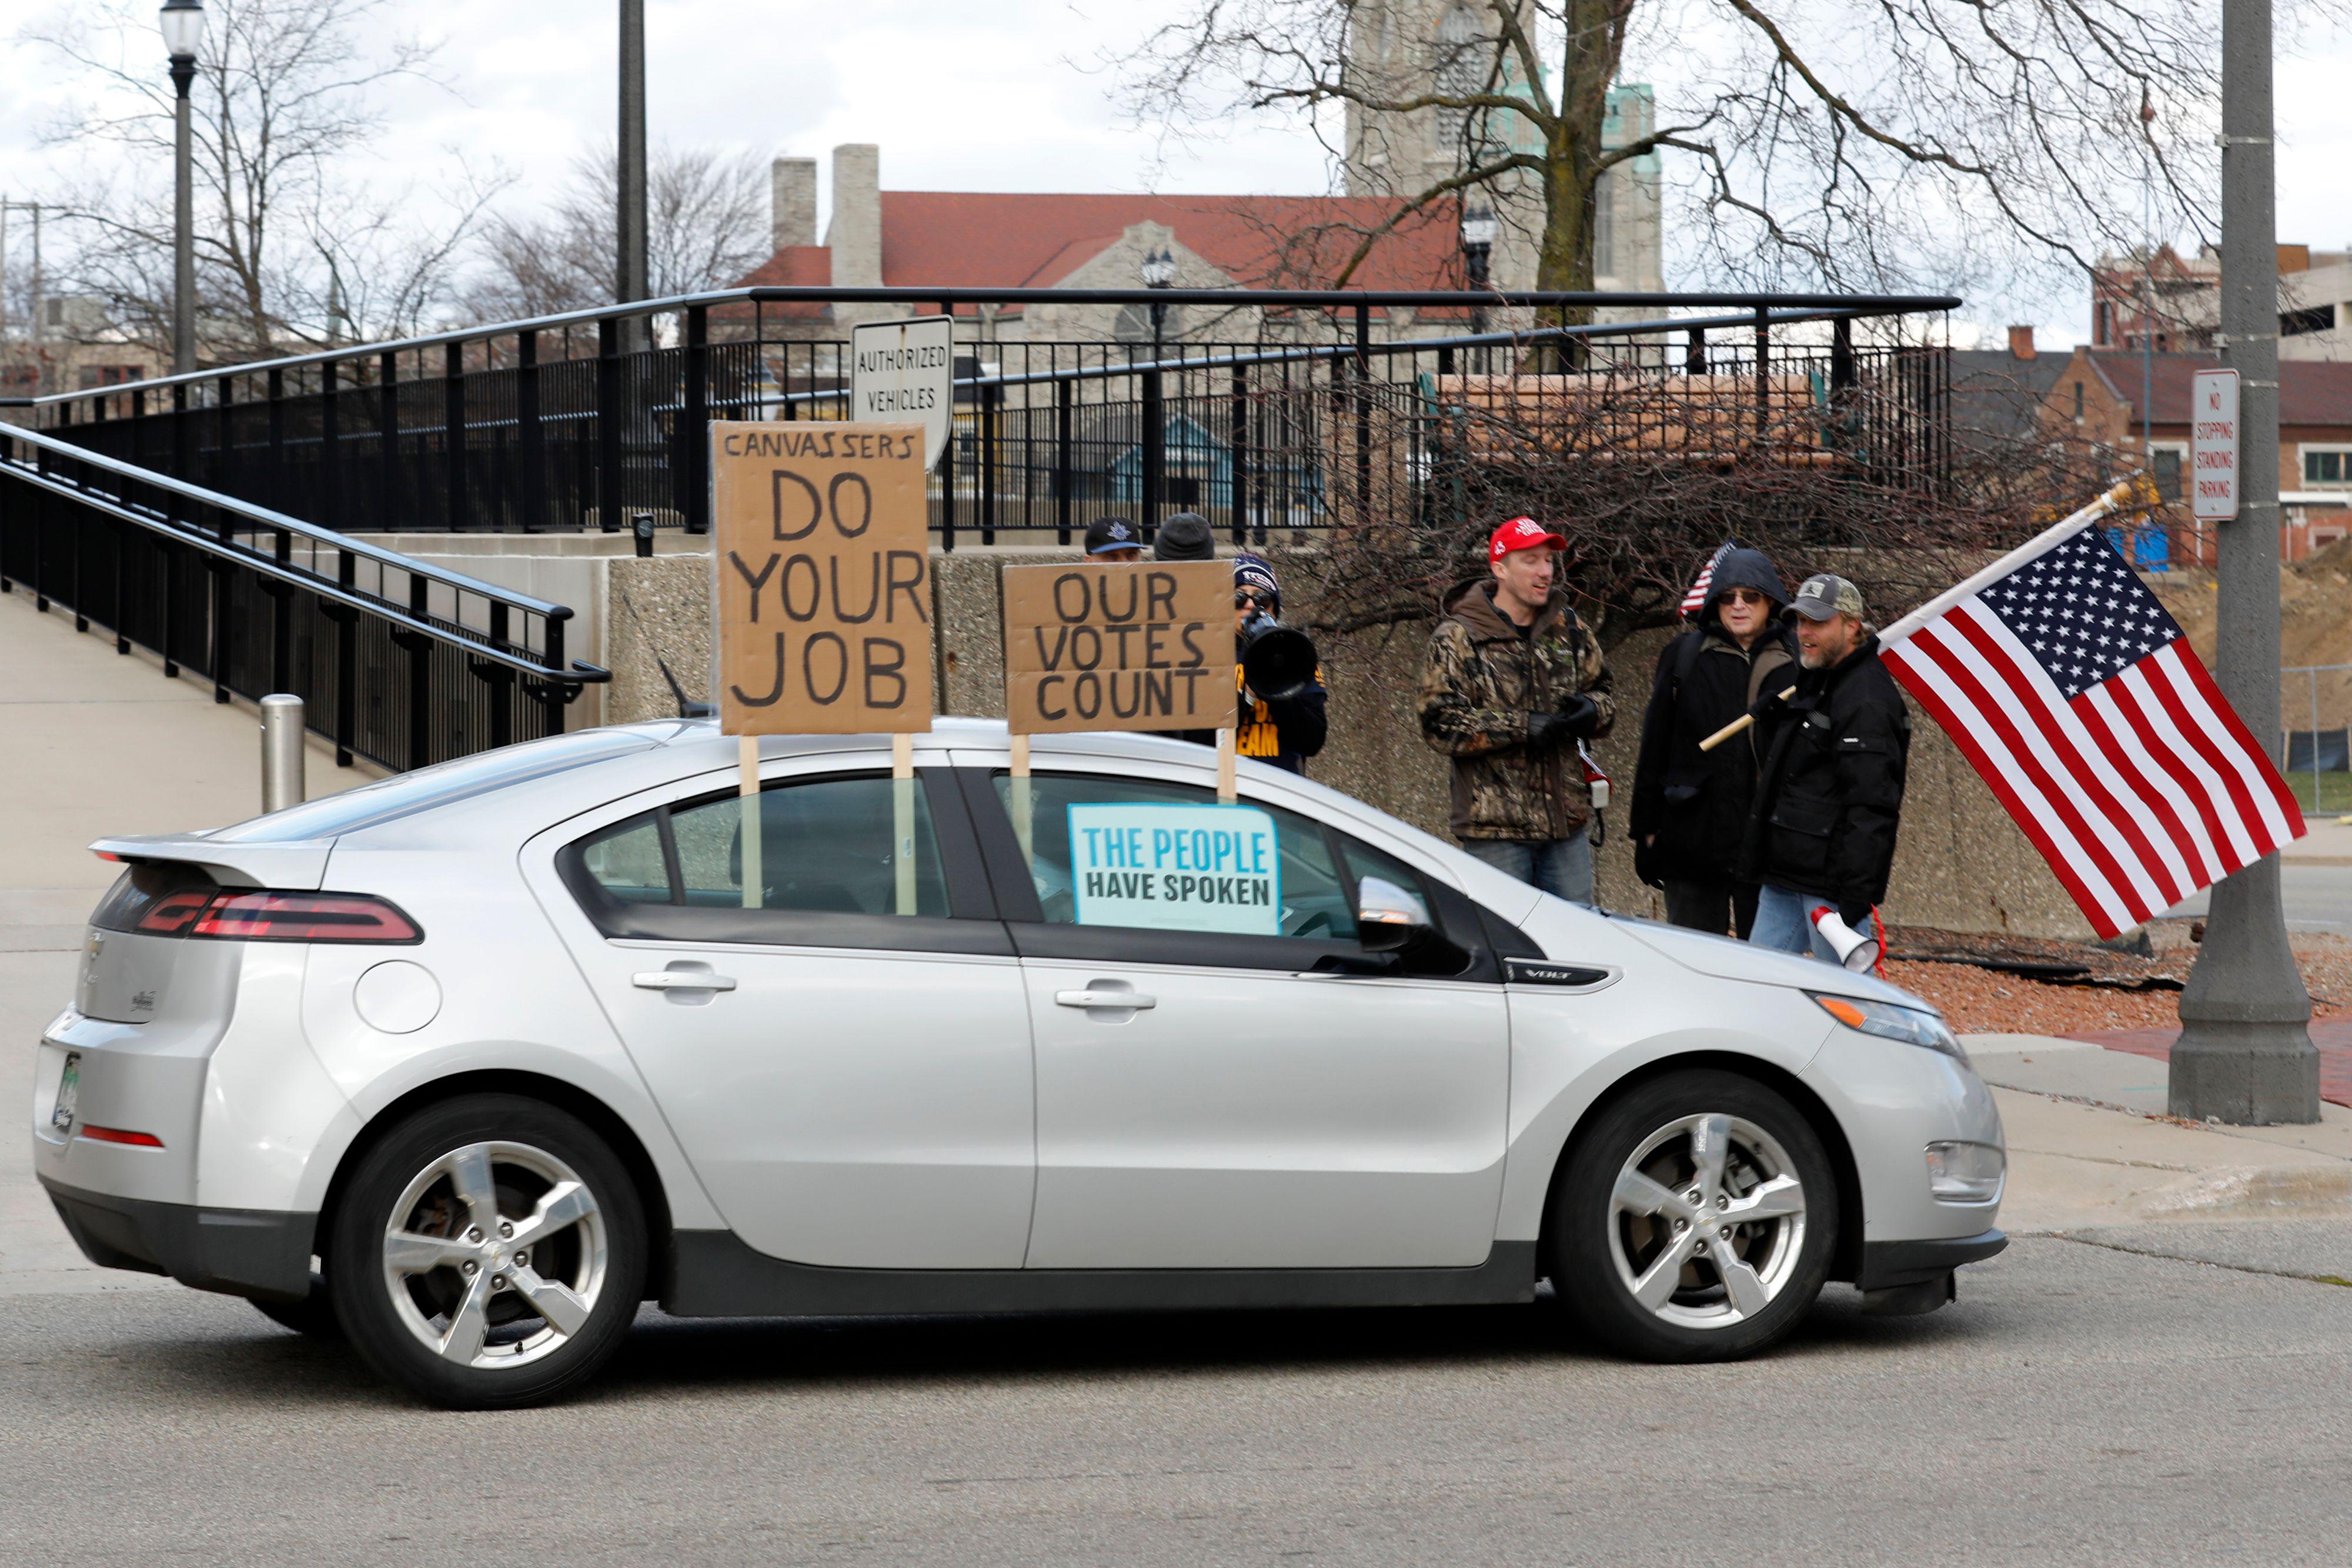 A car with signs on the window that say "DO YOUR JOB," "OUR VOTES COUNT," and "THE PEOPLE HAVE SPOKEN" drives by a group of protesters, one of whom is holding an American flag